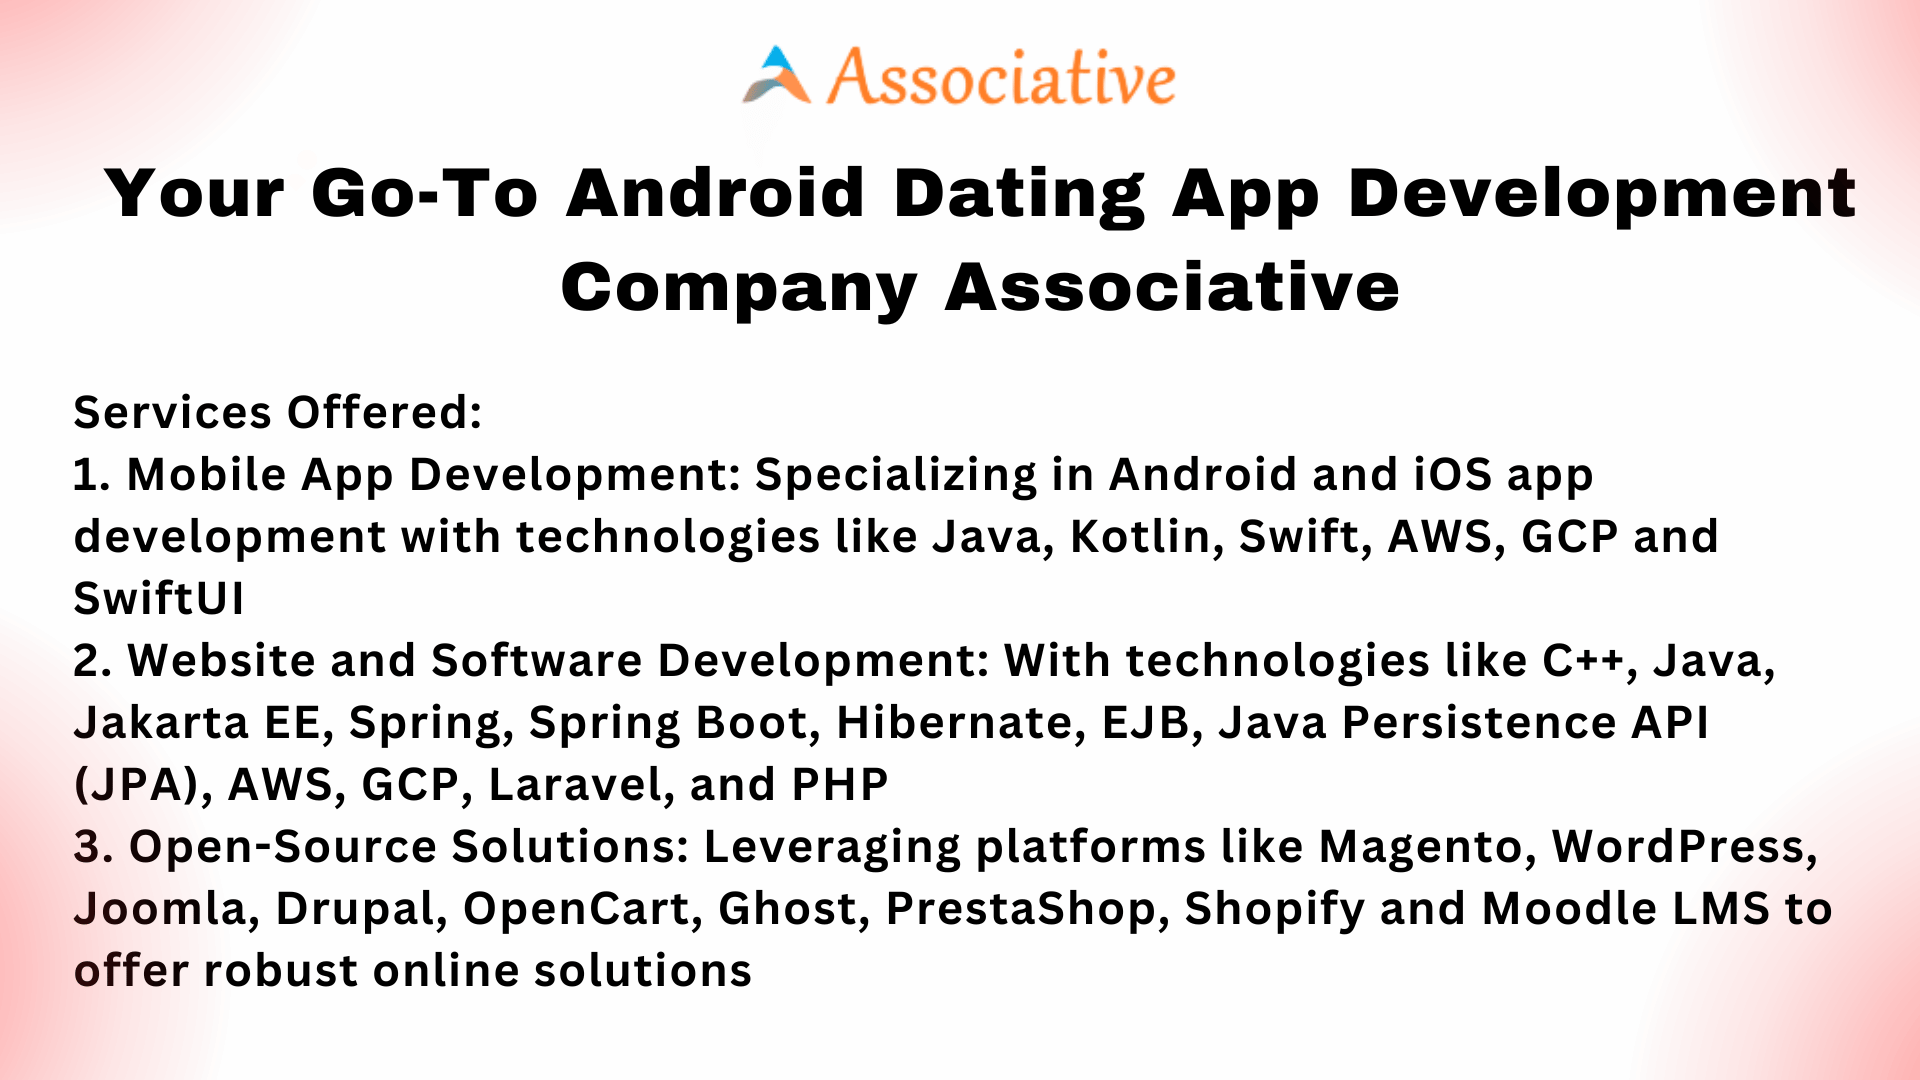 Your Go-To Android Dating App Development Company Associative